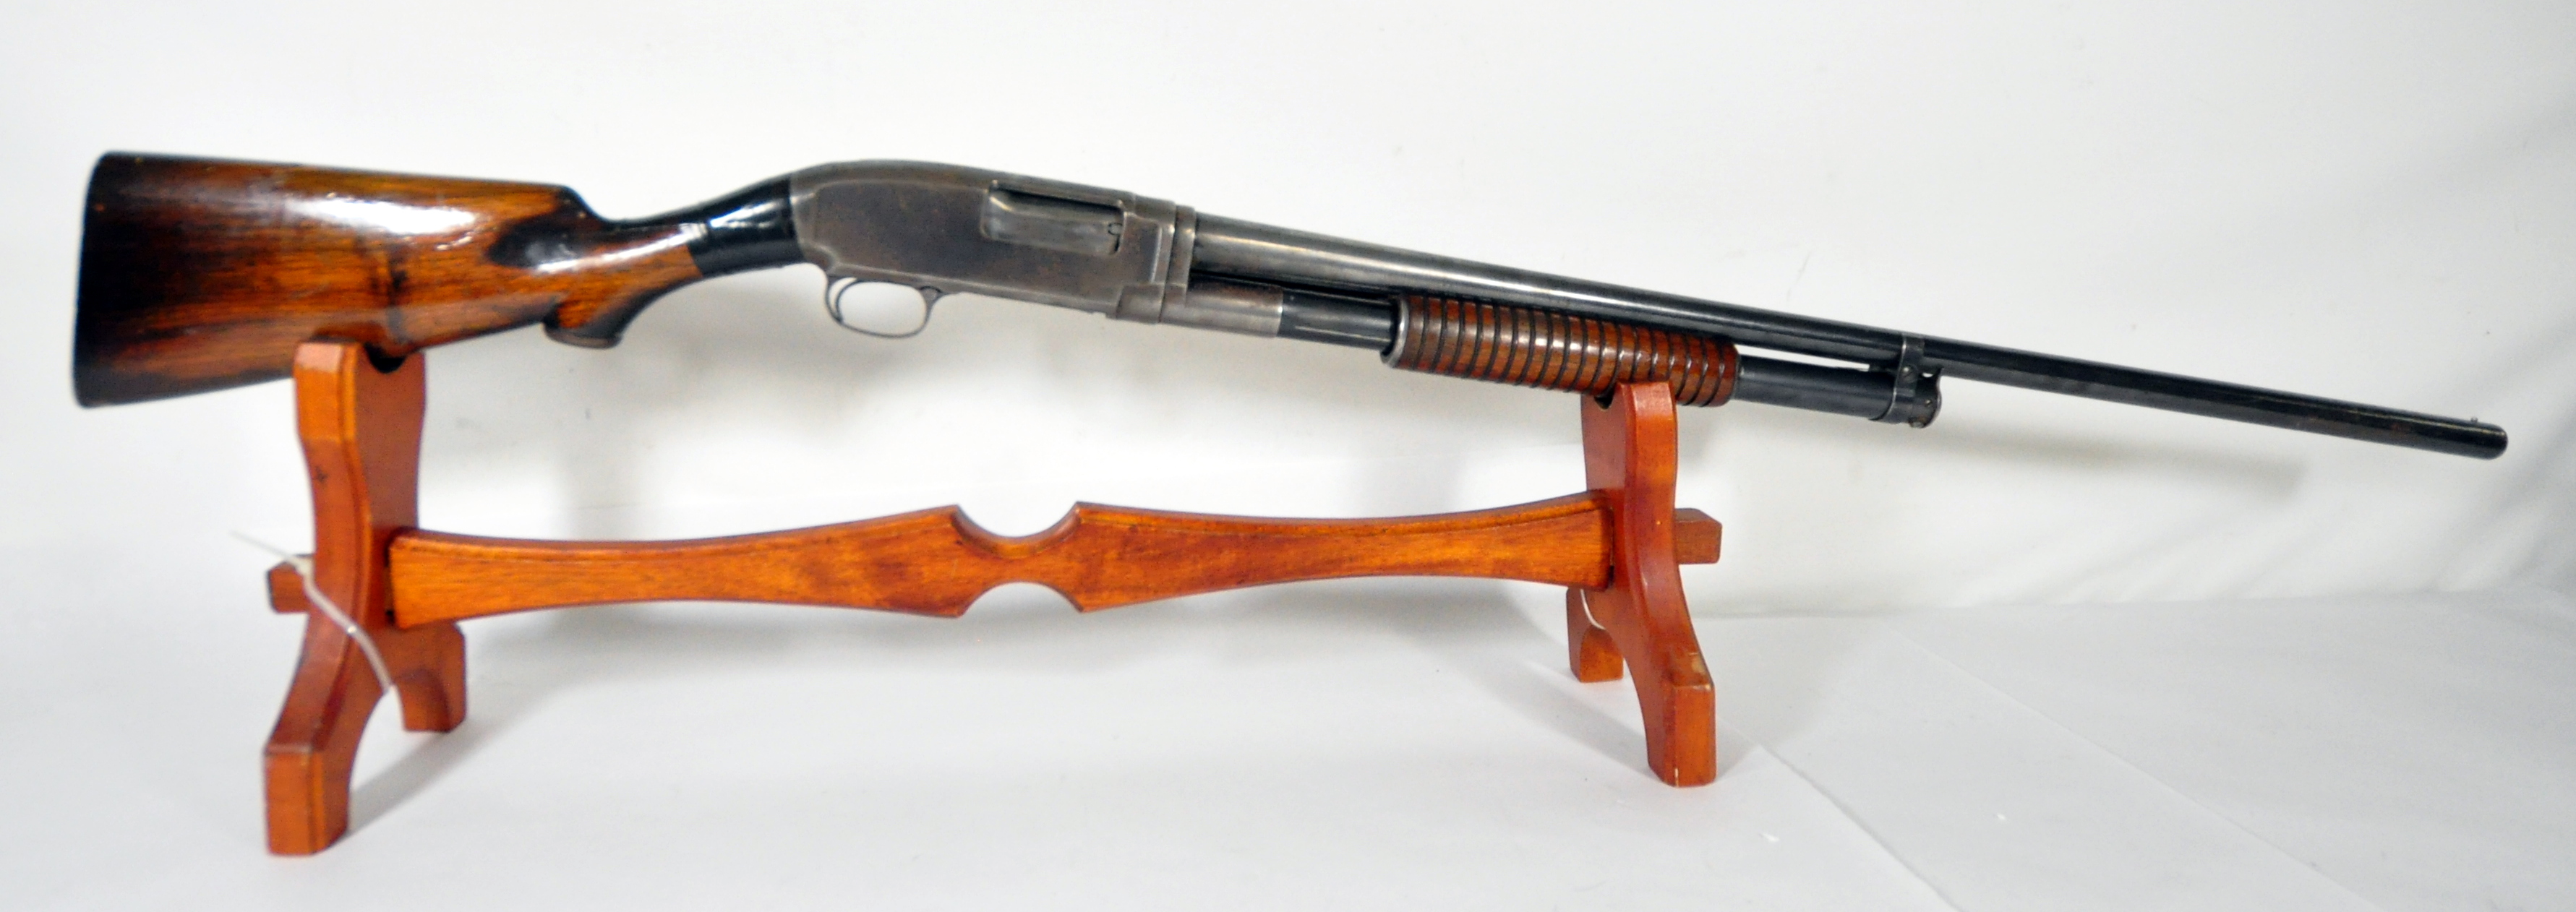 most people think of the Model 97 Trench gun, the Model 1200, or the elegan...